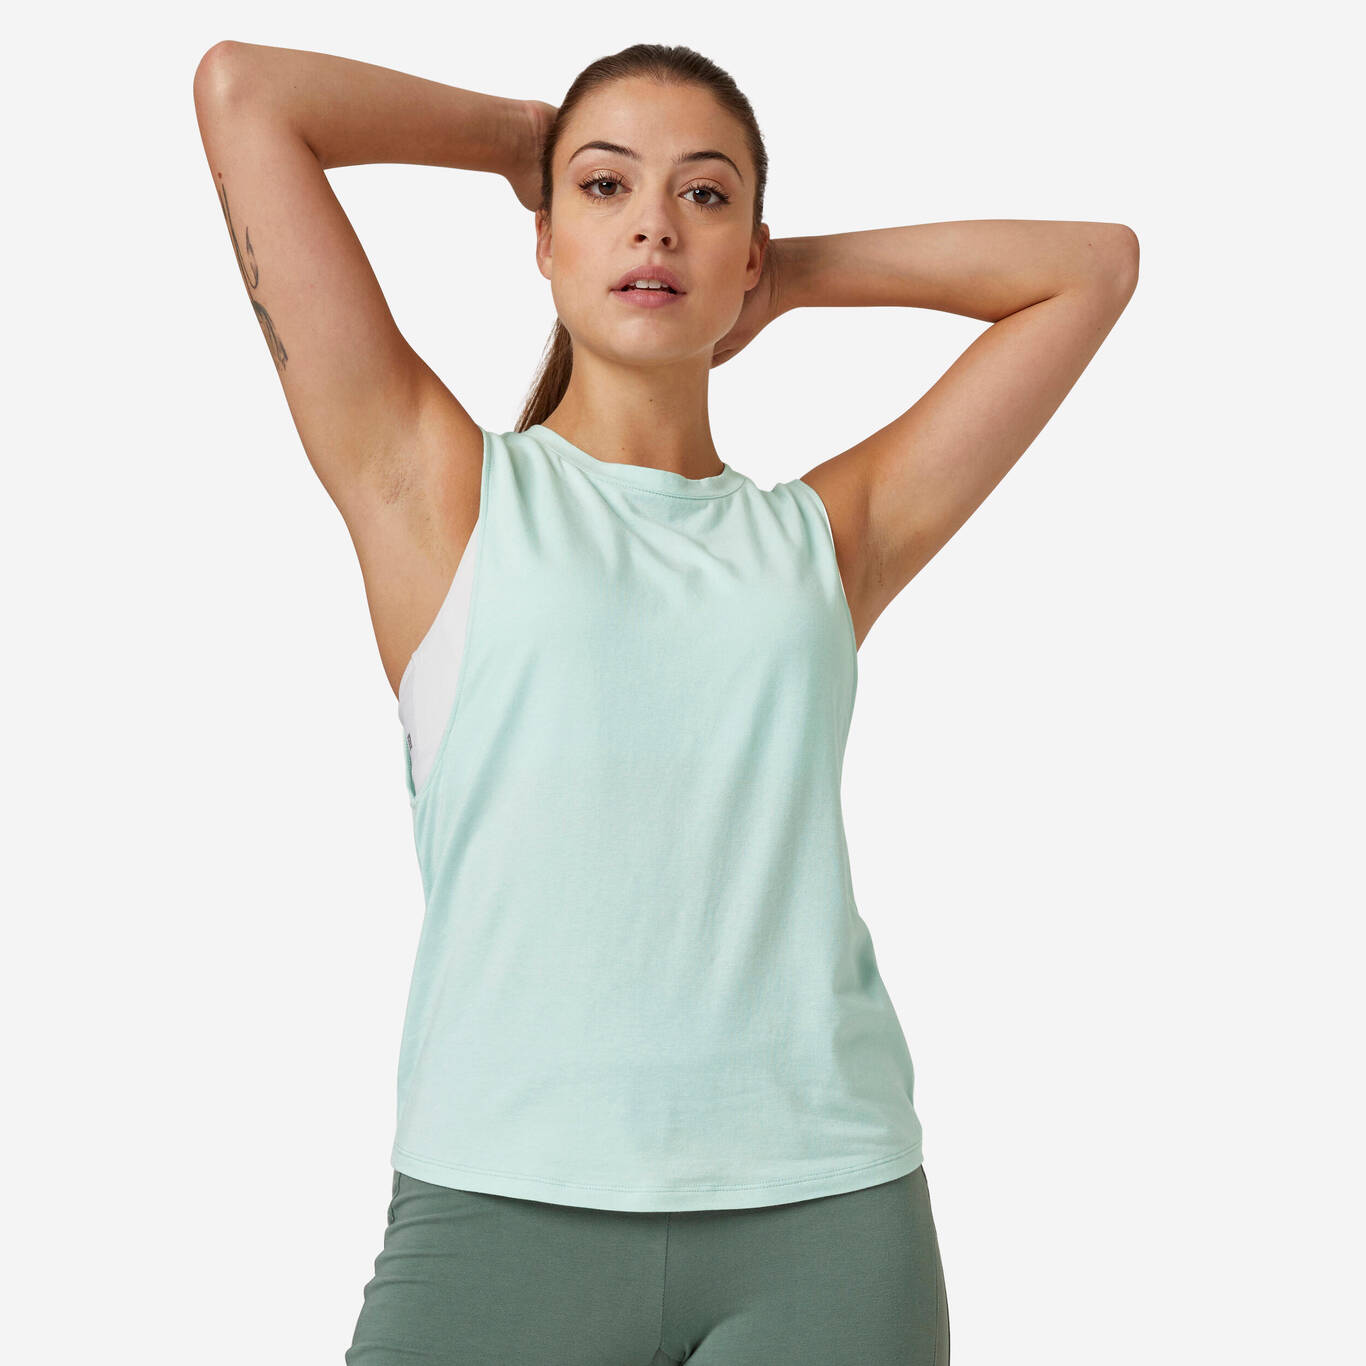 Women's Loose-Fit Fitness Tank Top 500 - Green